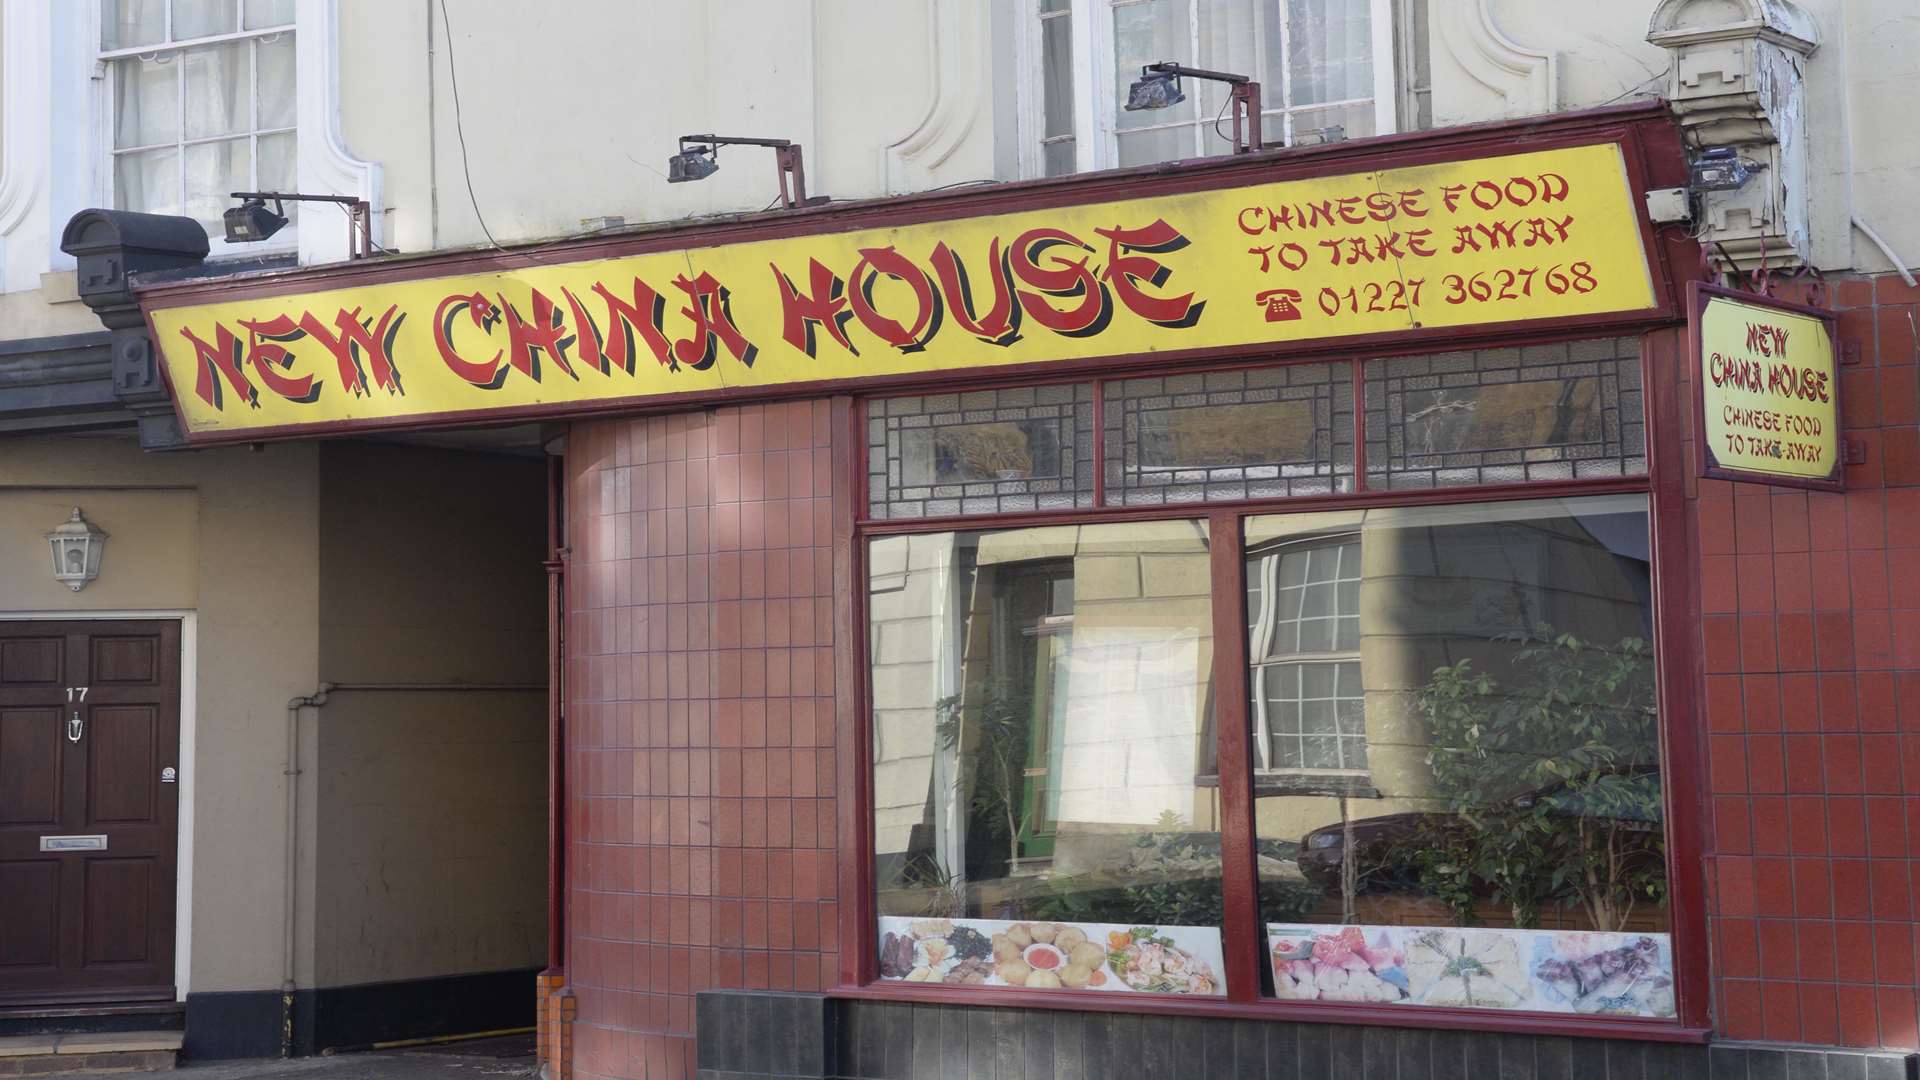 New China House in Avenue Road, Herne Bay